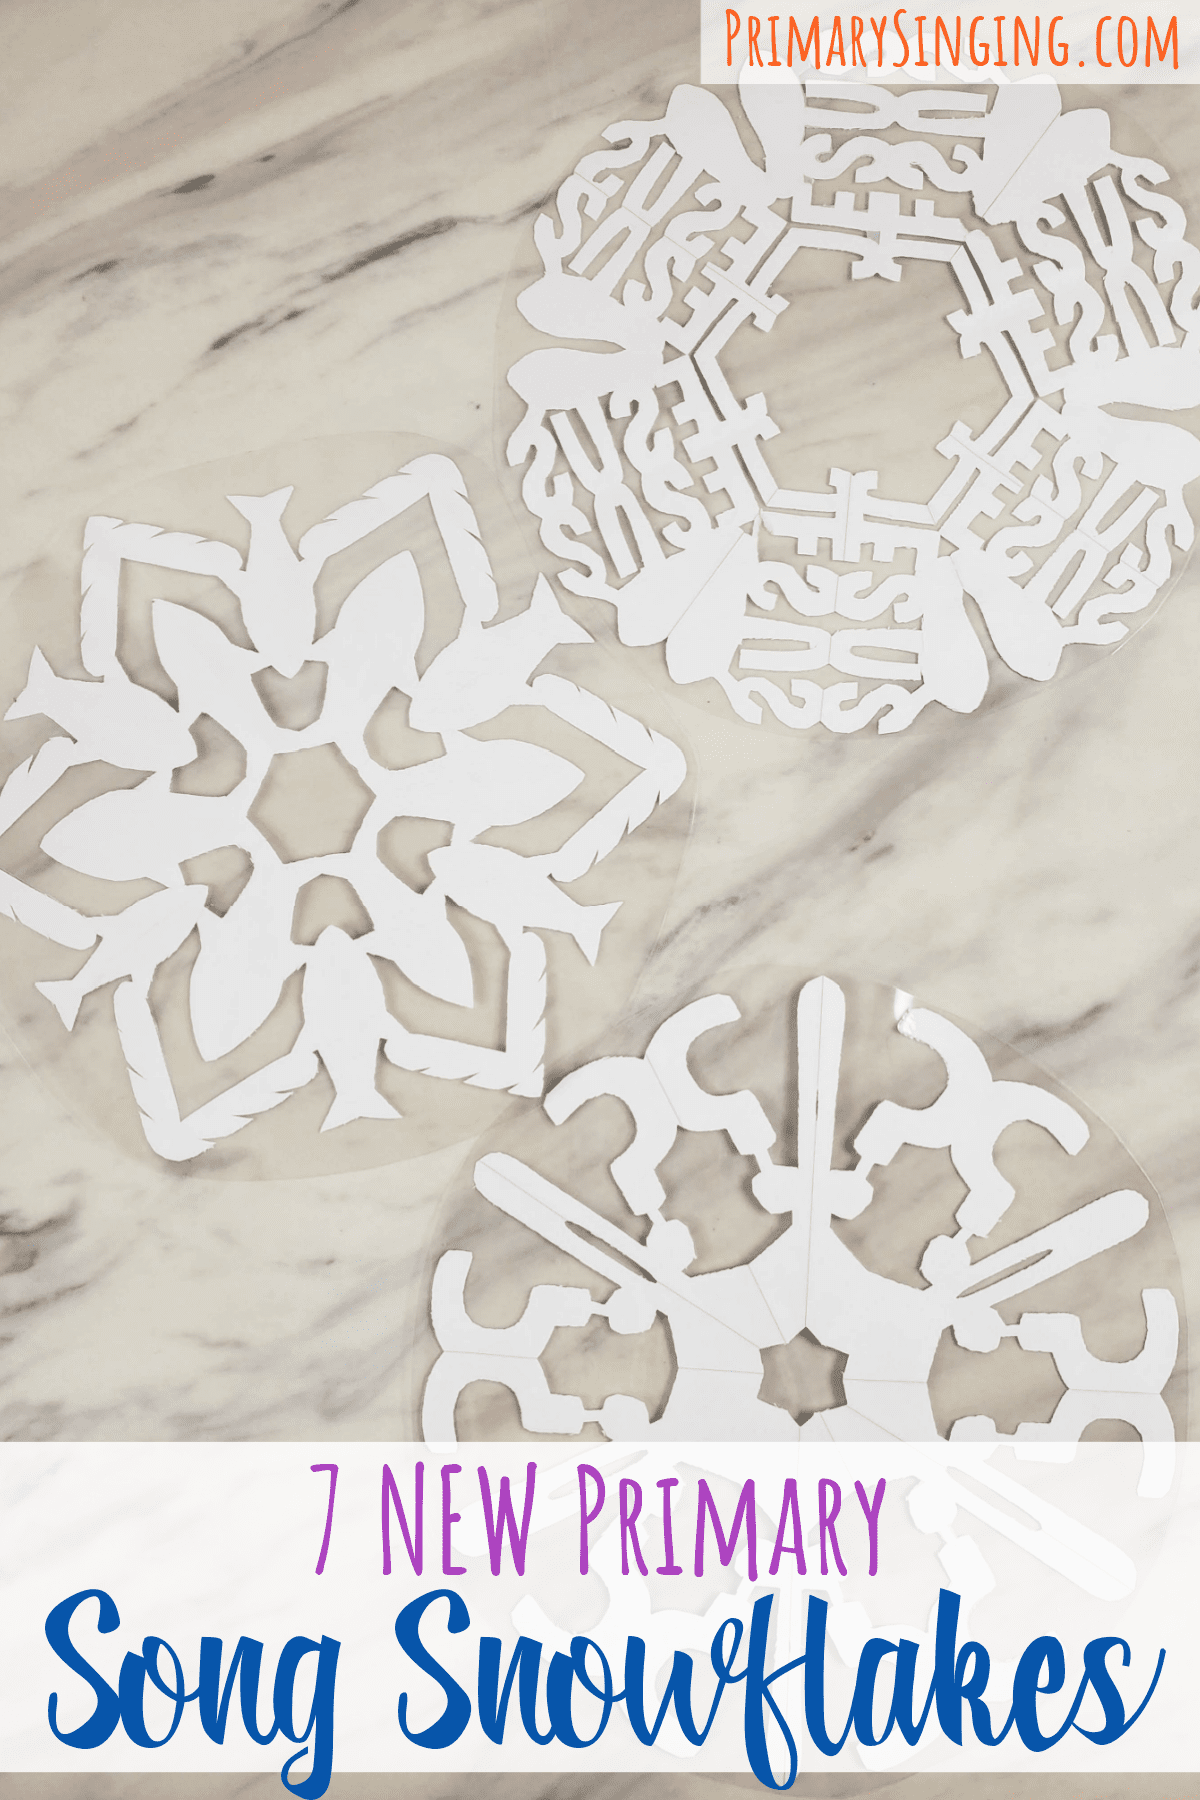 7 more fun printable Primary Song Snowflakes template printables! Use these cute snowflakes as a way to introduce a variety of new songs or review your choice of song selections. Singing time idea for LDS Primary music leaders.